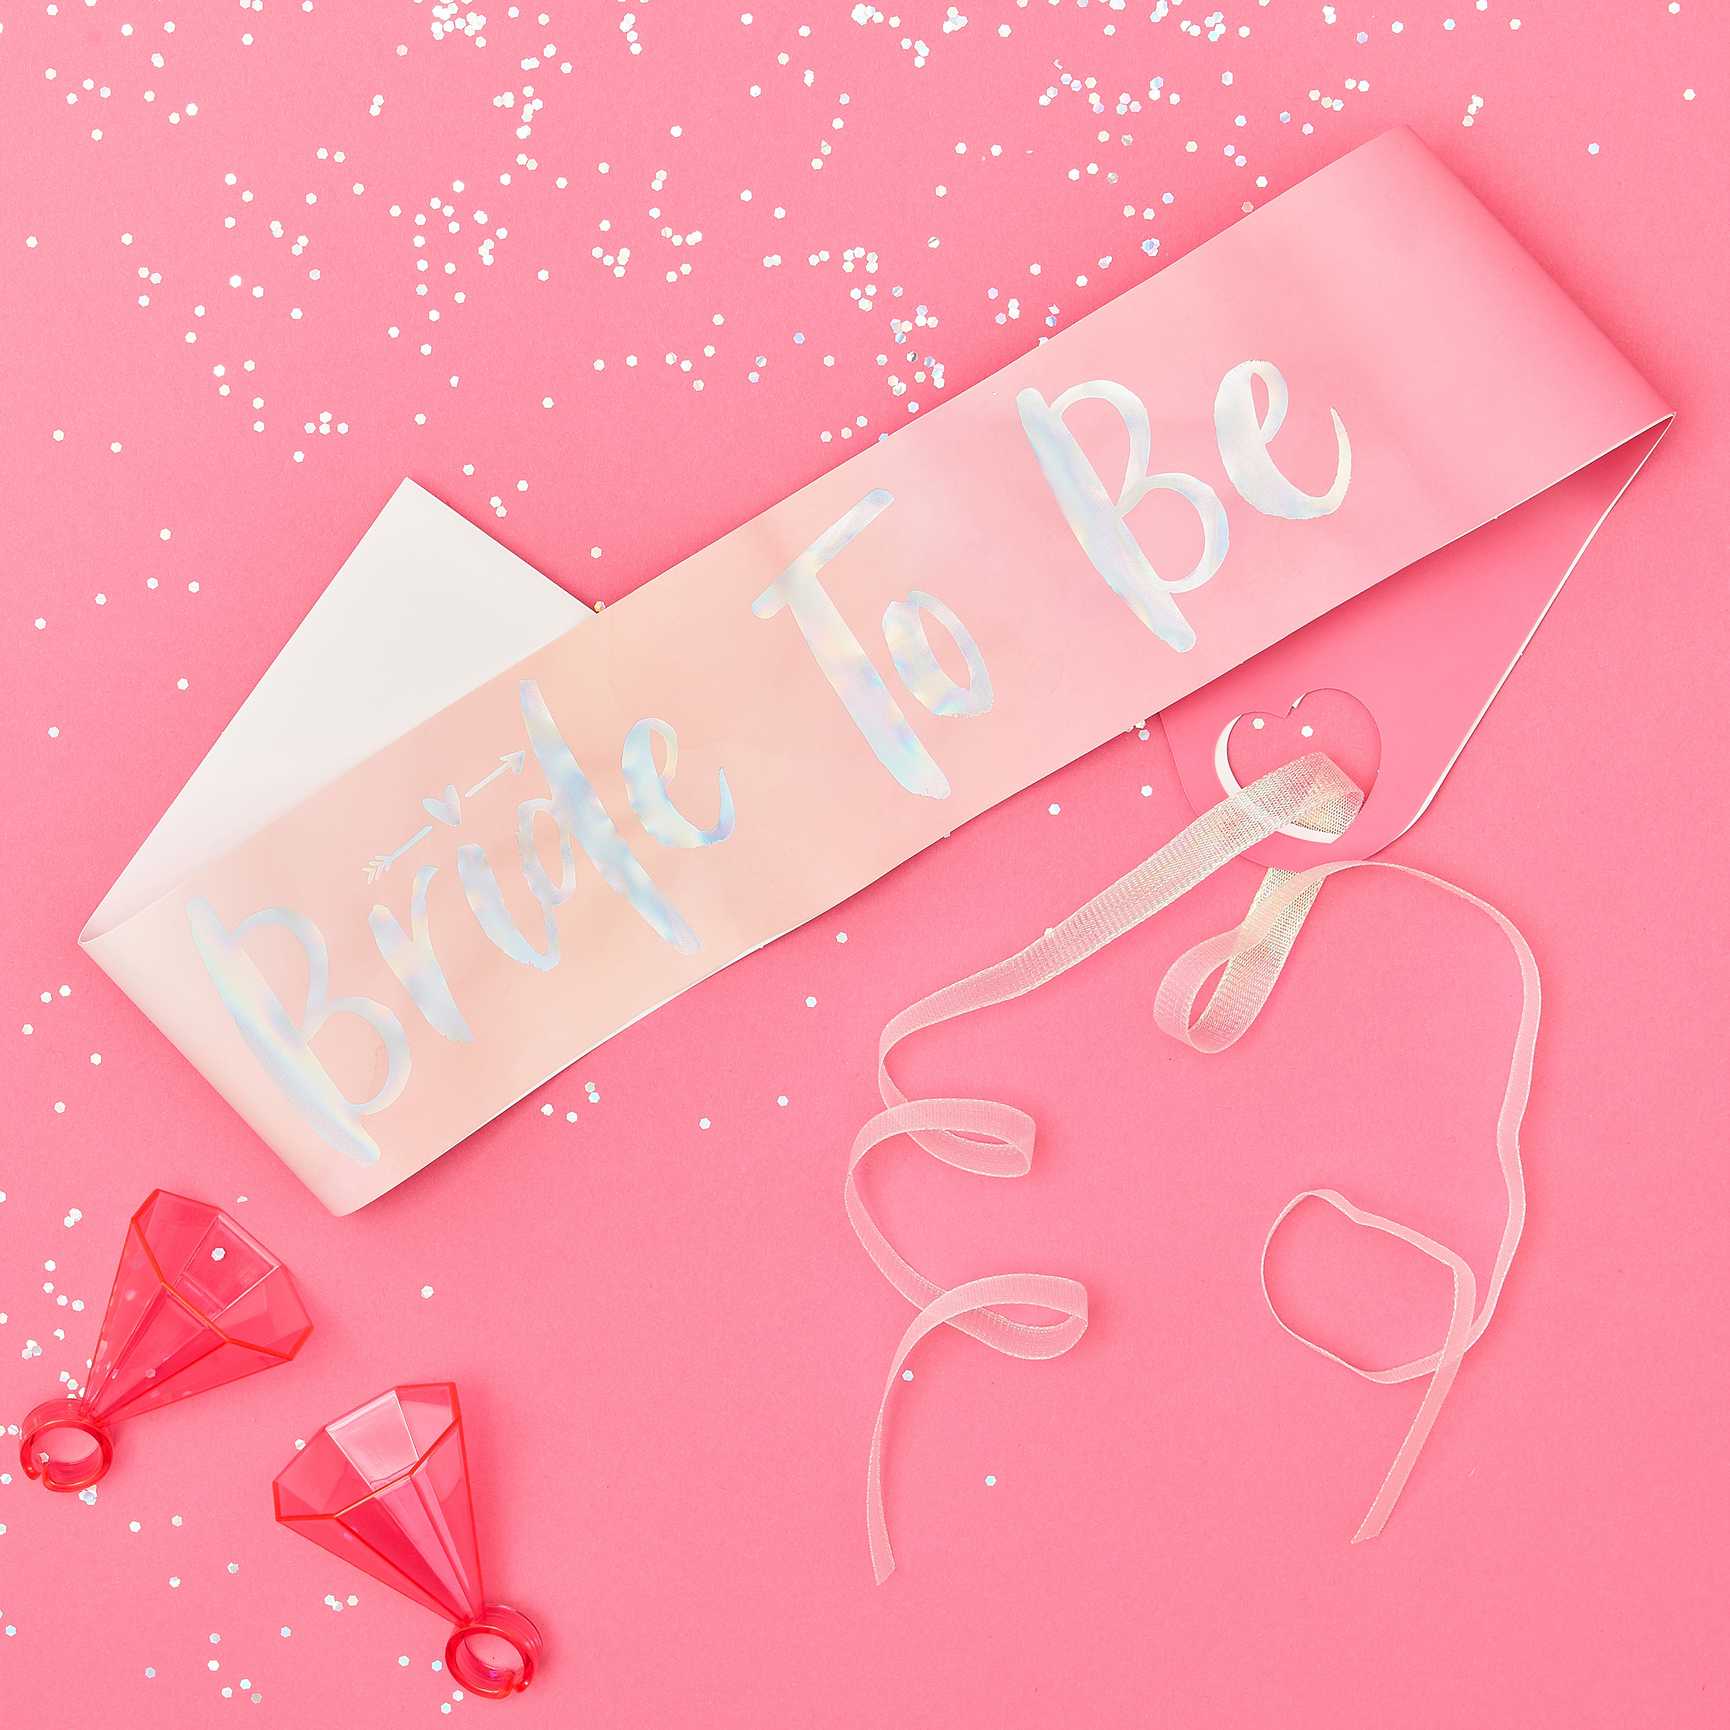 Bride Band "Bride to Be!" Pink